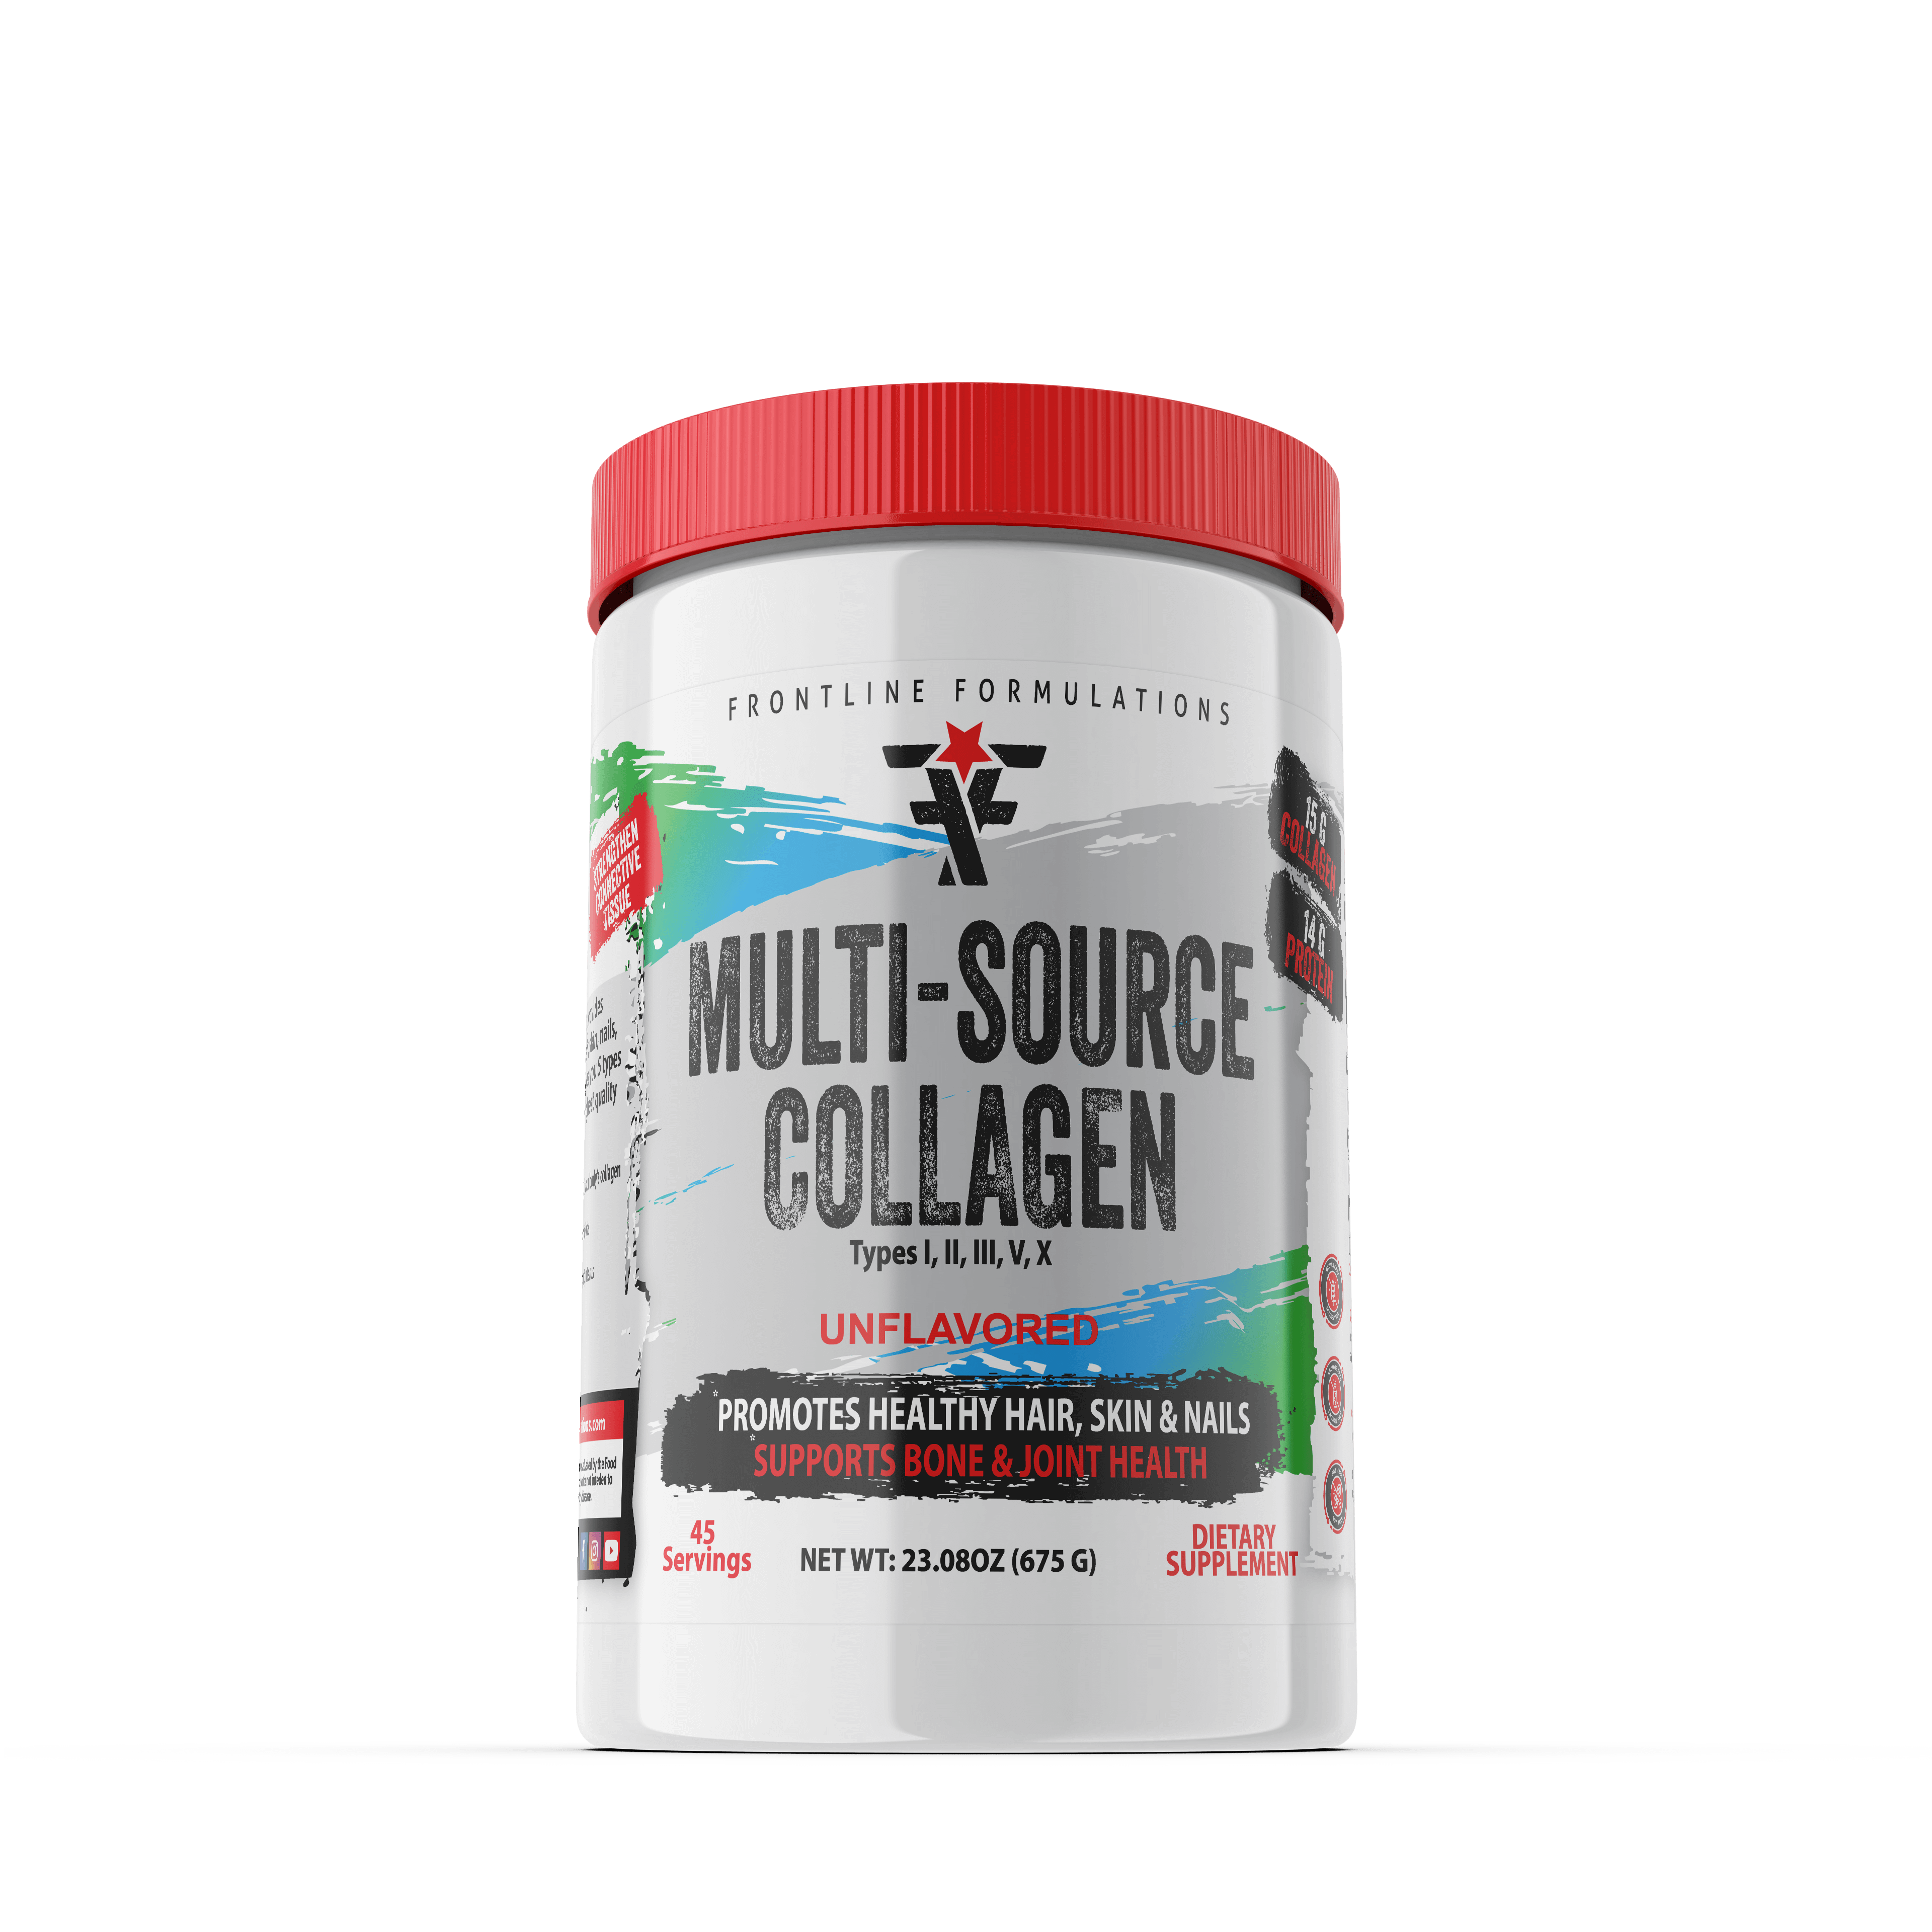 Collagen Multi-Source Collagen is carefully engineered and balanced for athletes, active individuals, and anyone looking for a premium collagen source in their diet. Collagen is the most abundant protein in your body. It provides structure to your bones,